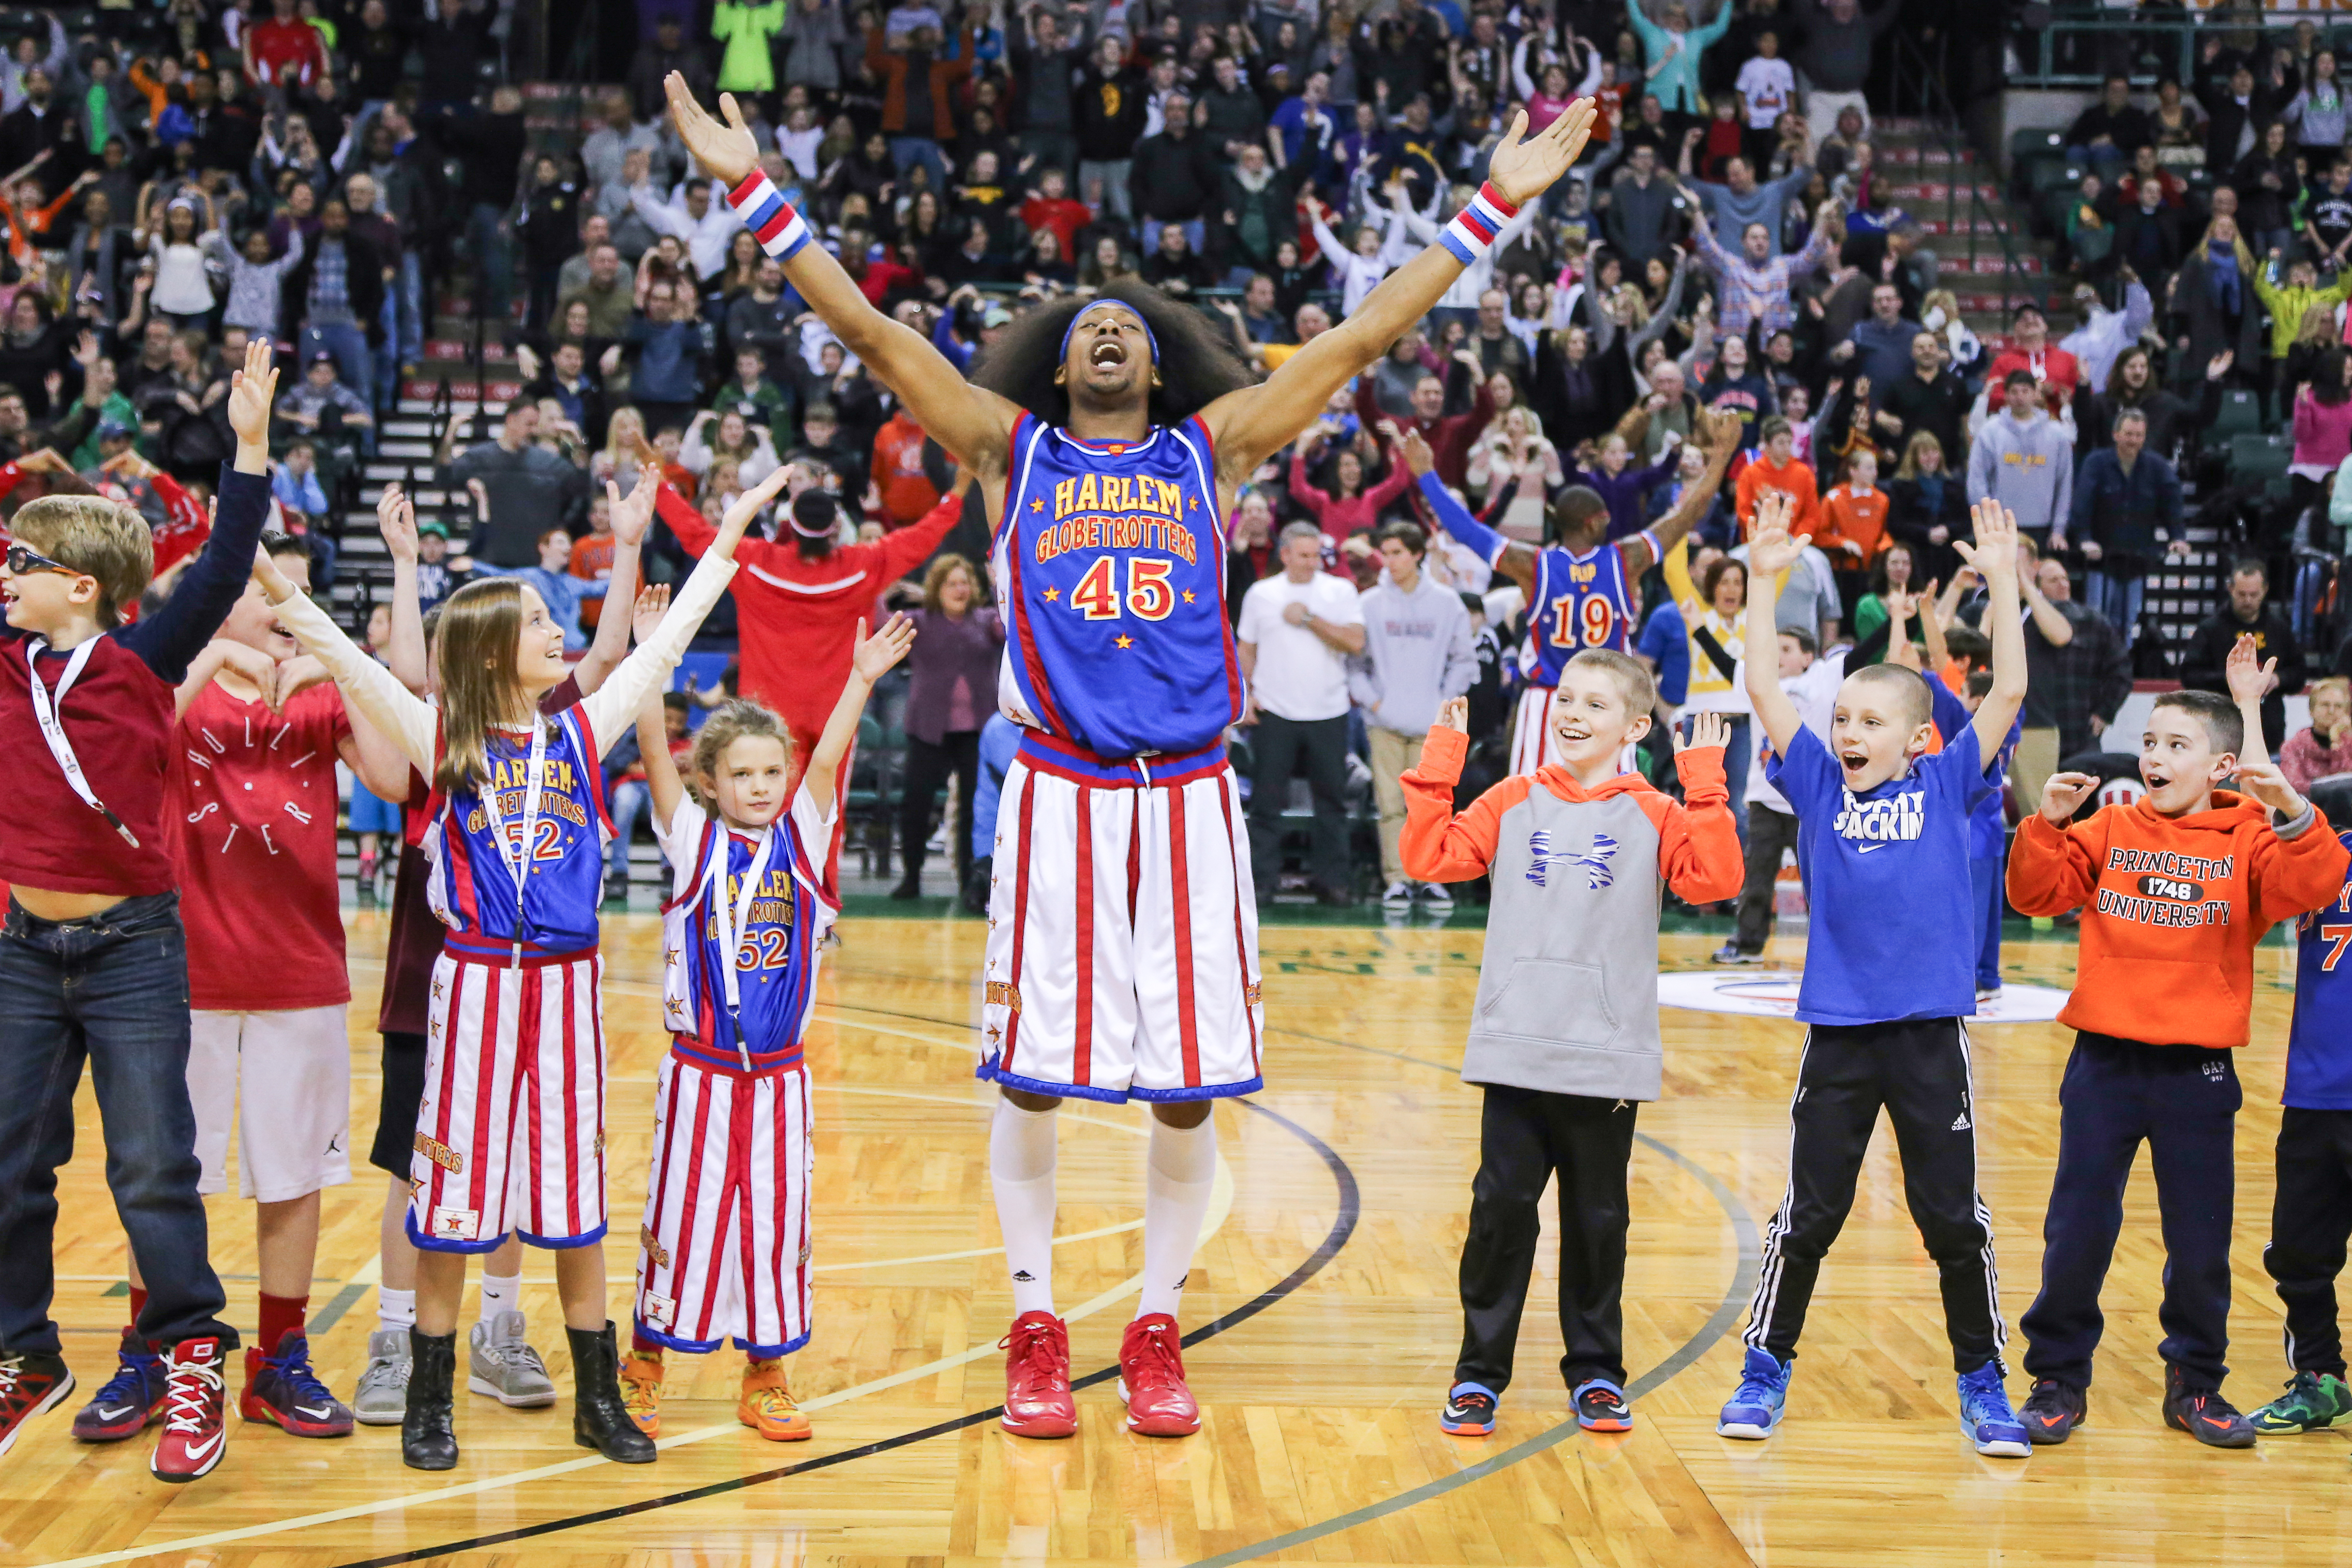 A Harlem Globetrotter raising arms with a bunch of kids on the basketball court